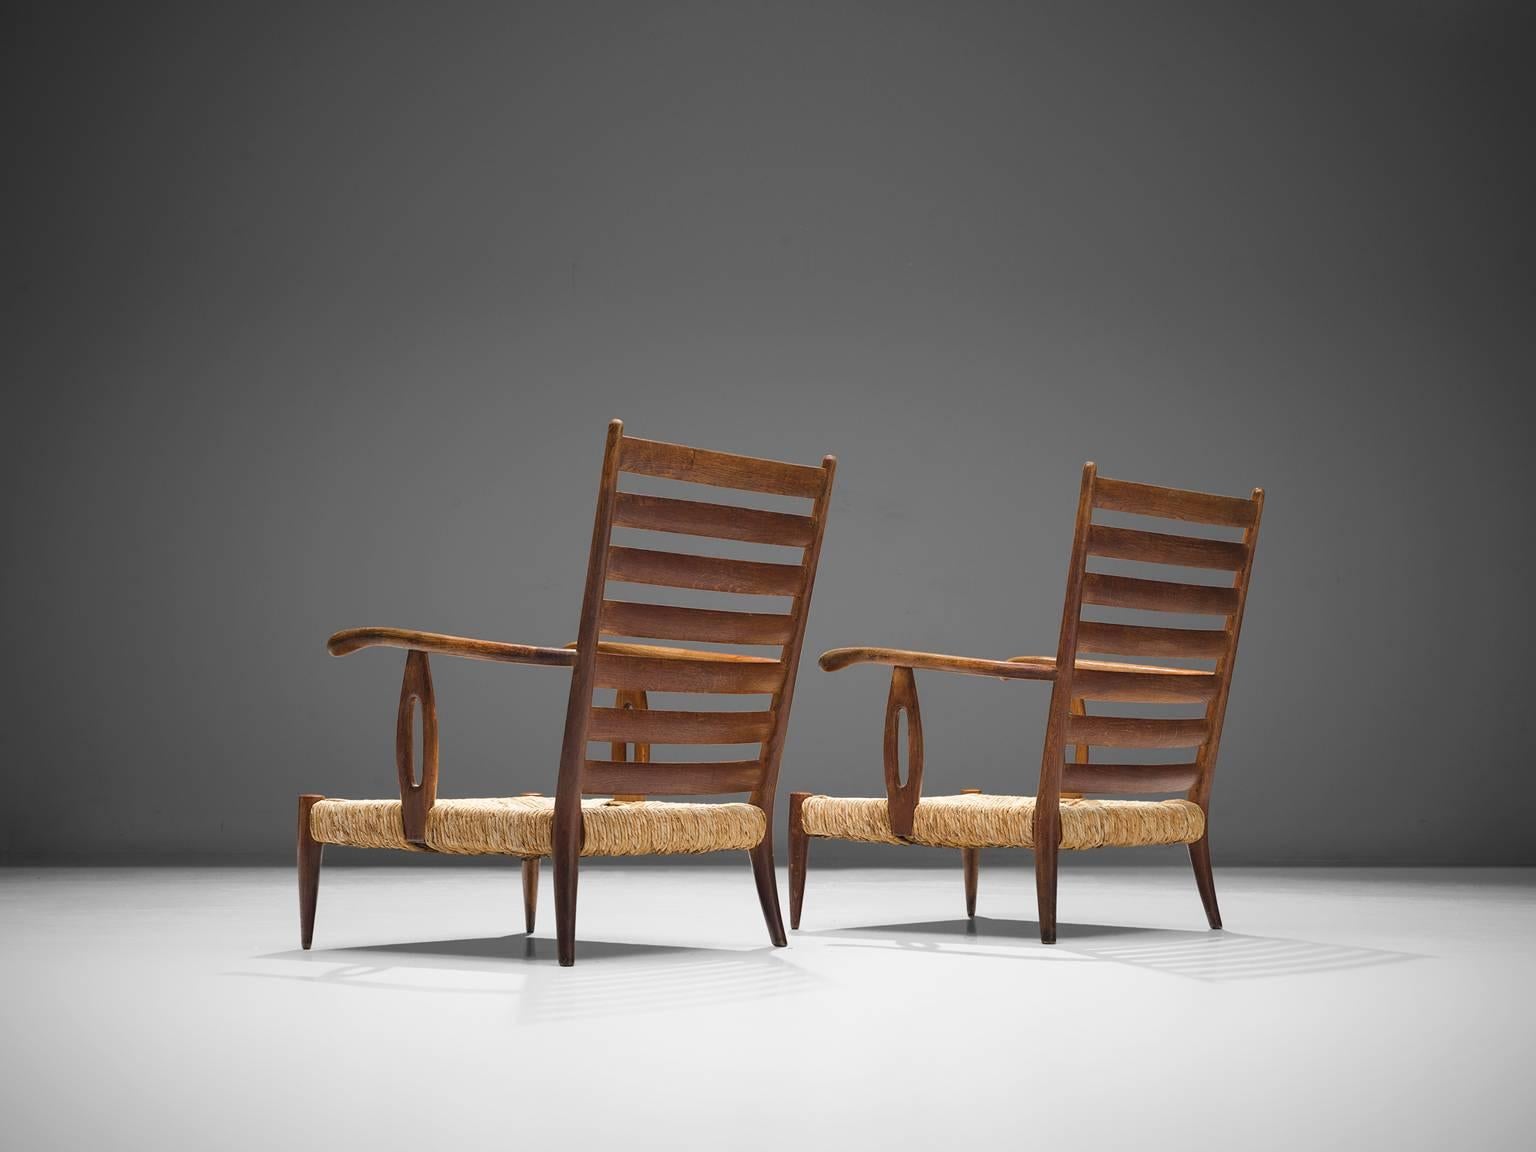 Paolo Buffa, pair of armchairs, walnut and wicker, Italy, 1950s.

This pair of wide, robust armchairs are made of wood and cane. The aesthetics of this set is natural and organic. The set features strong features that are quintessential for Buffa,